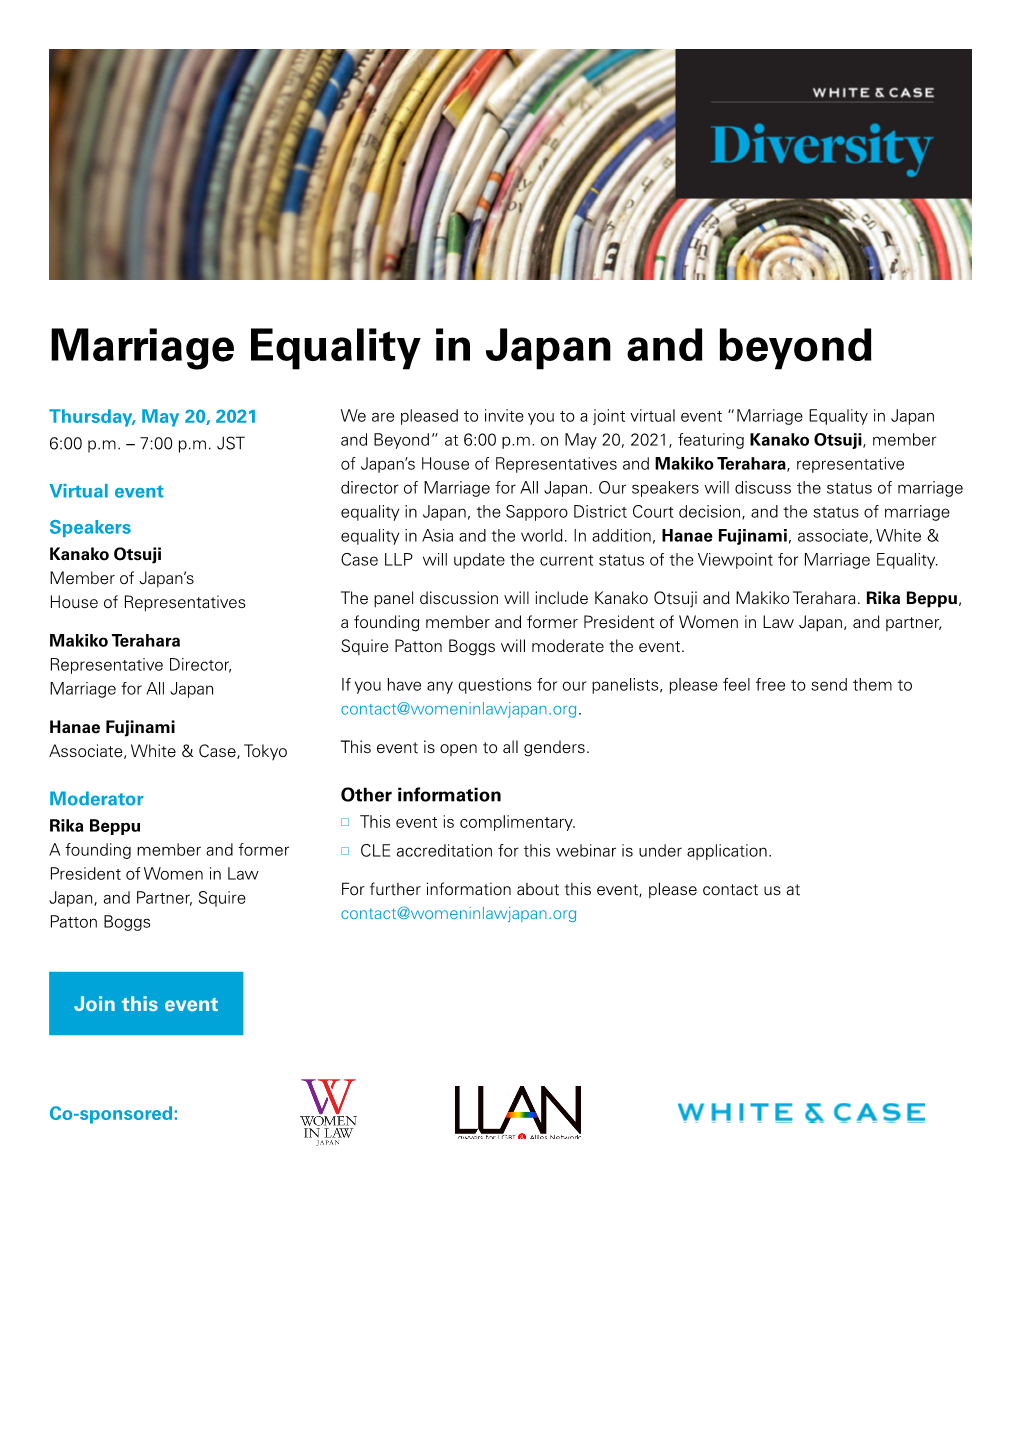 Marriage Equality in Japan and Beyond